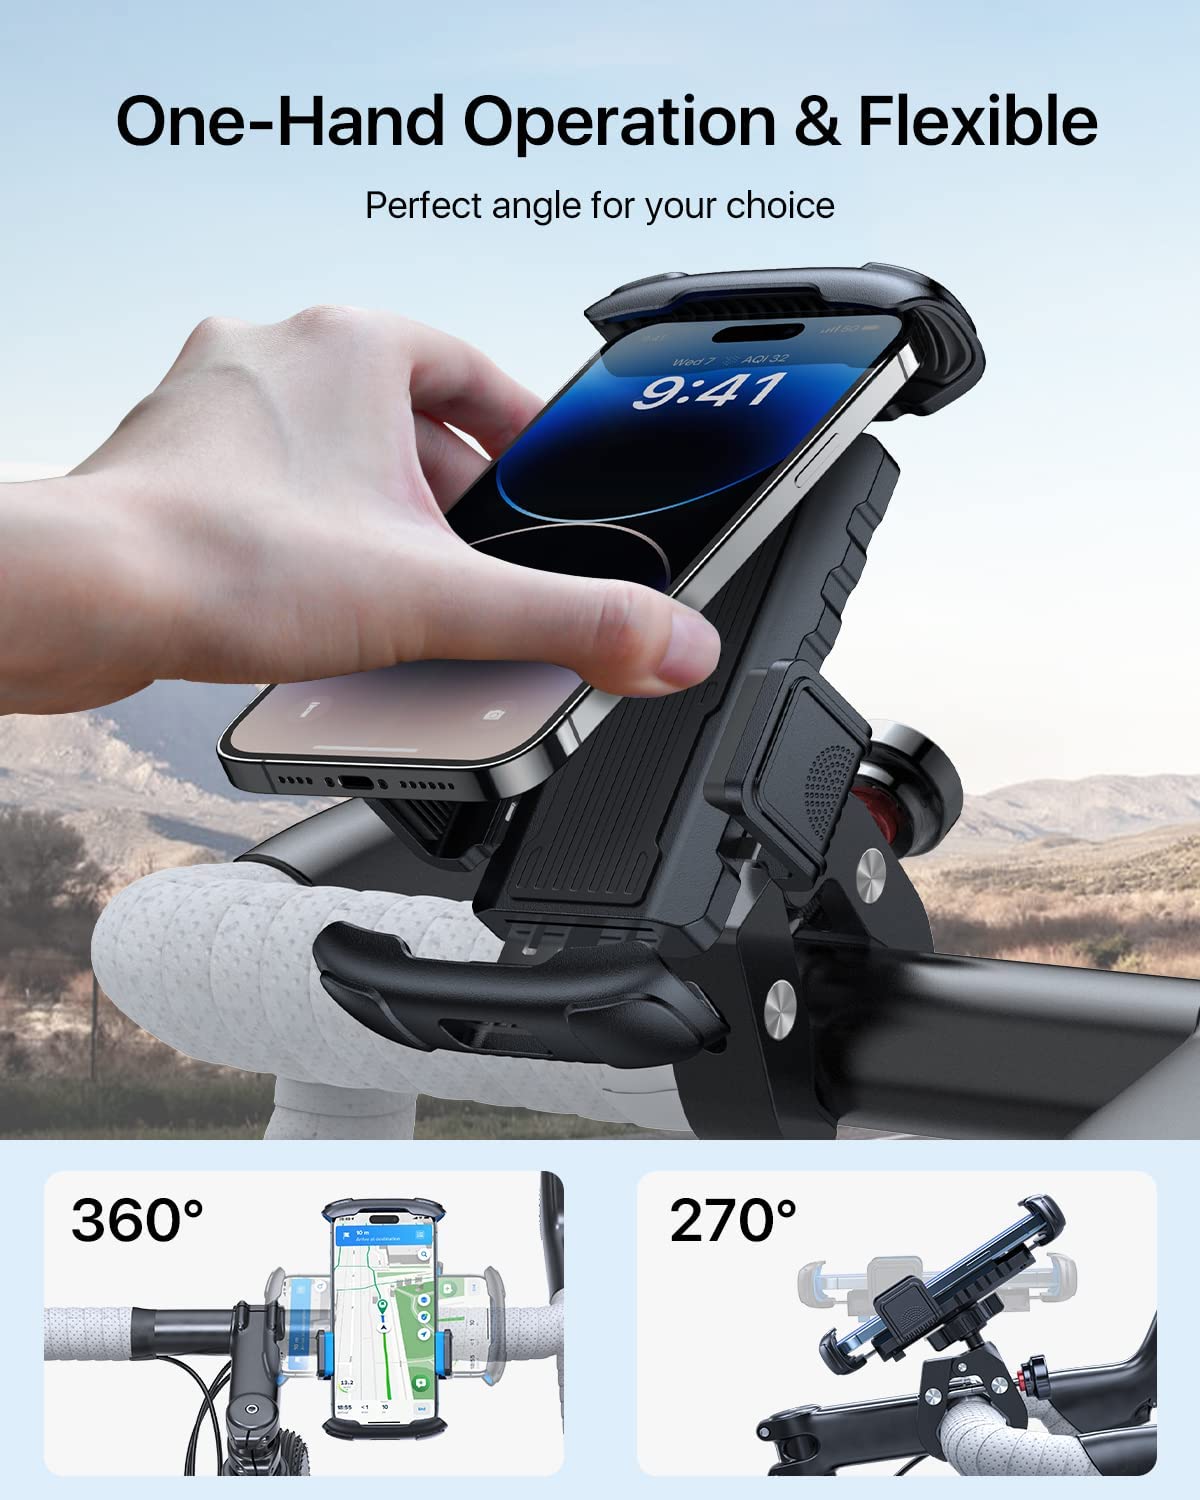 Andobil Bike Phone Mount anti-theft - Free Your Hands, Enjoy Your Life